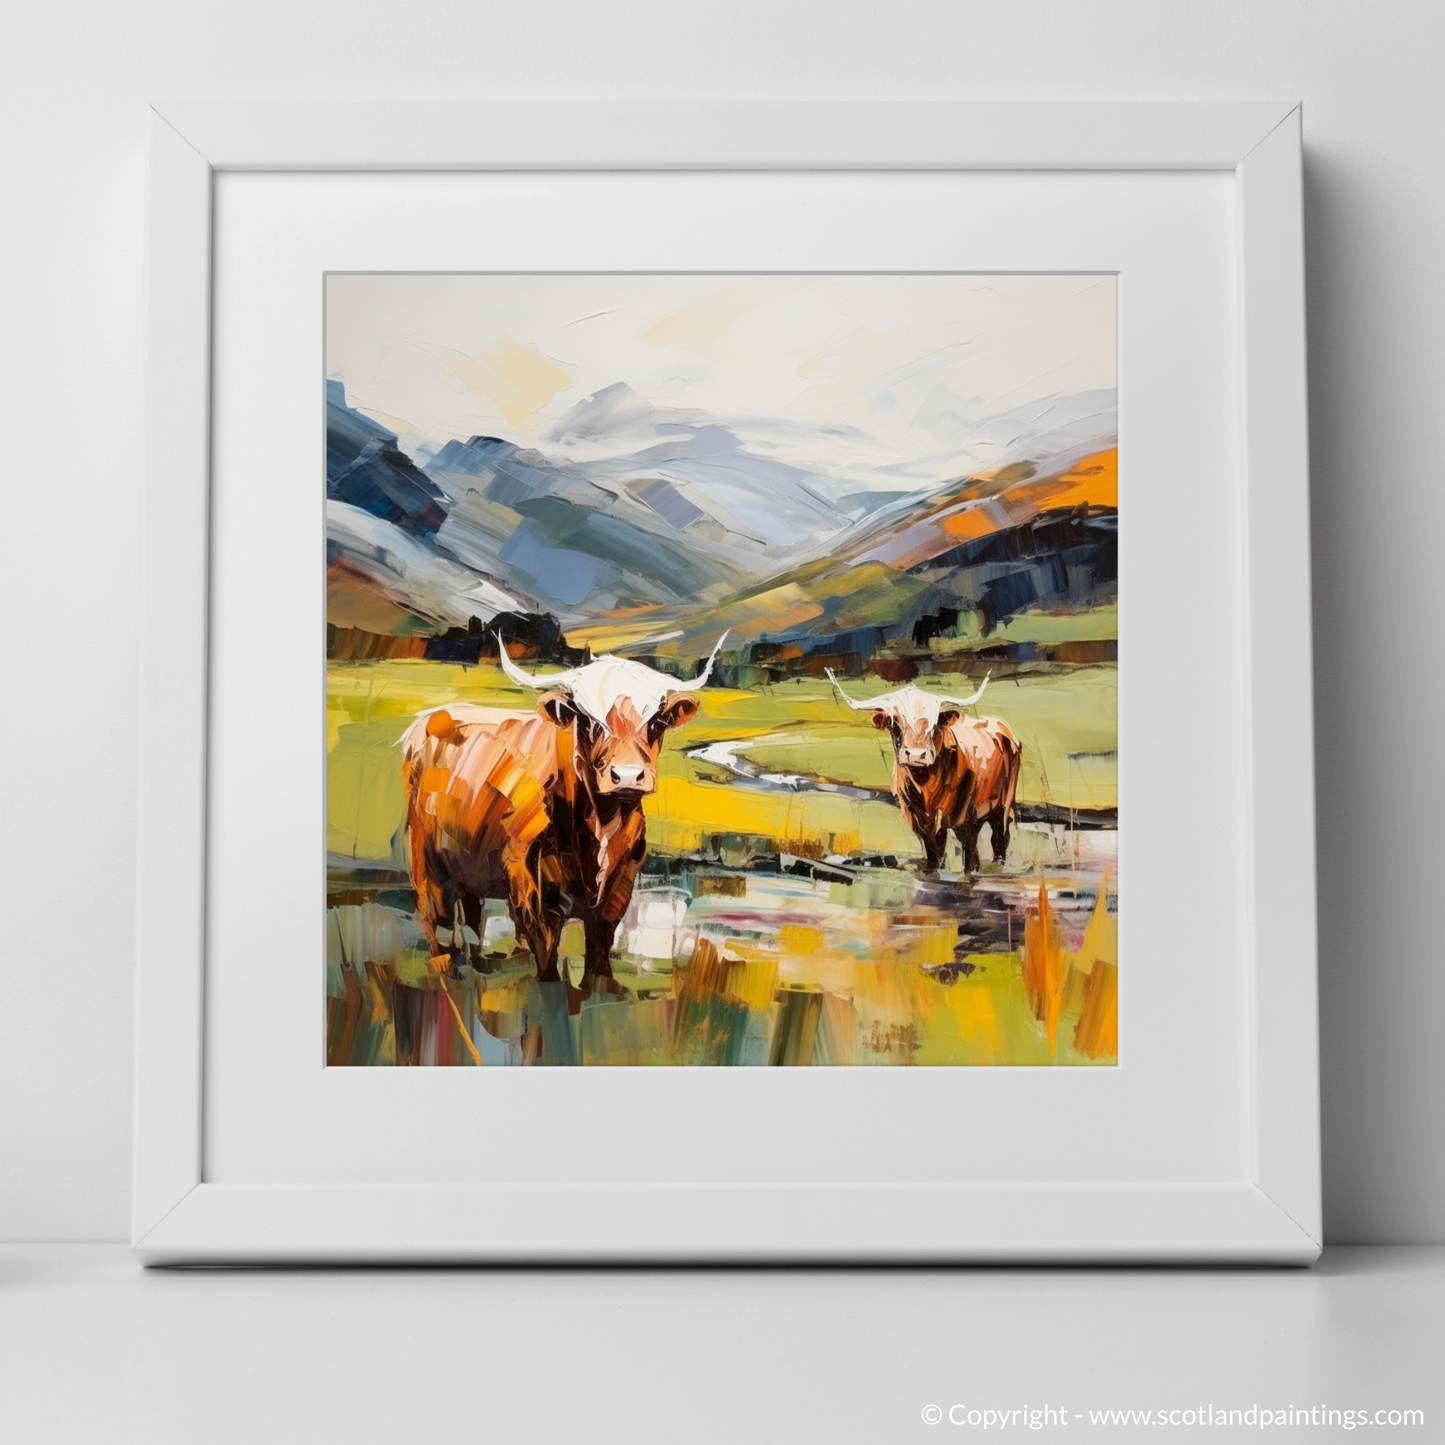 Art Print of Highland cows in Glencoe with a white frame